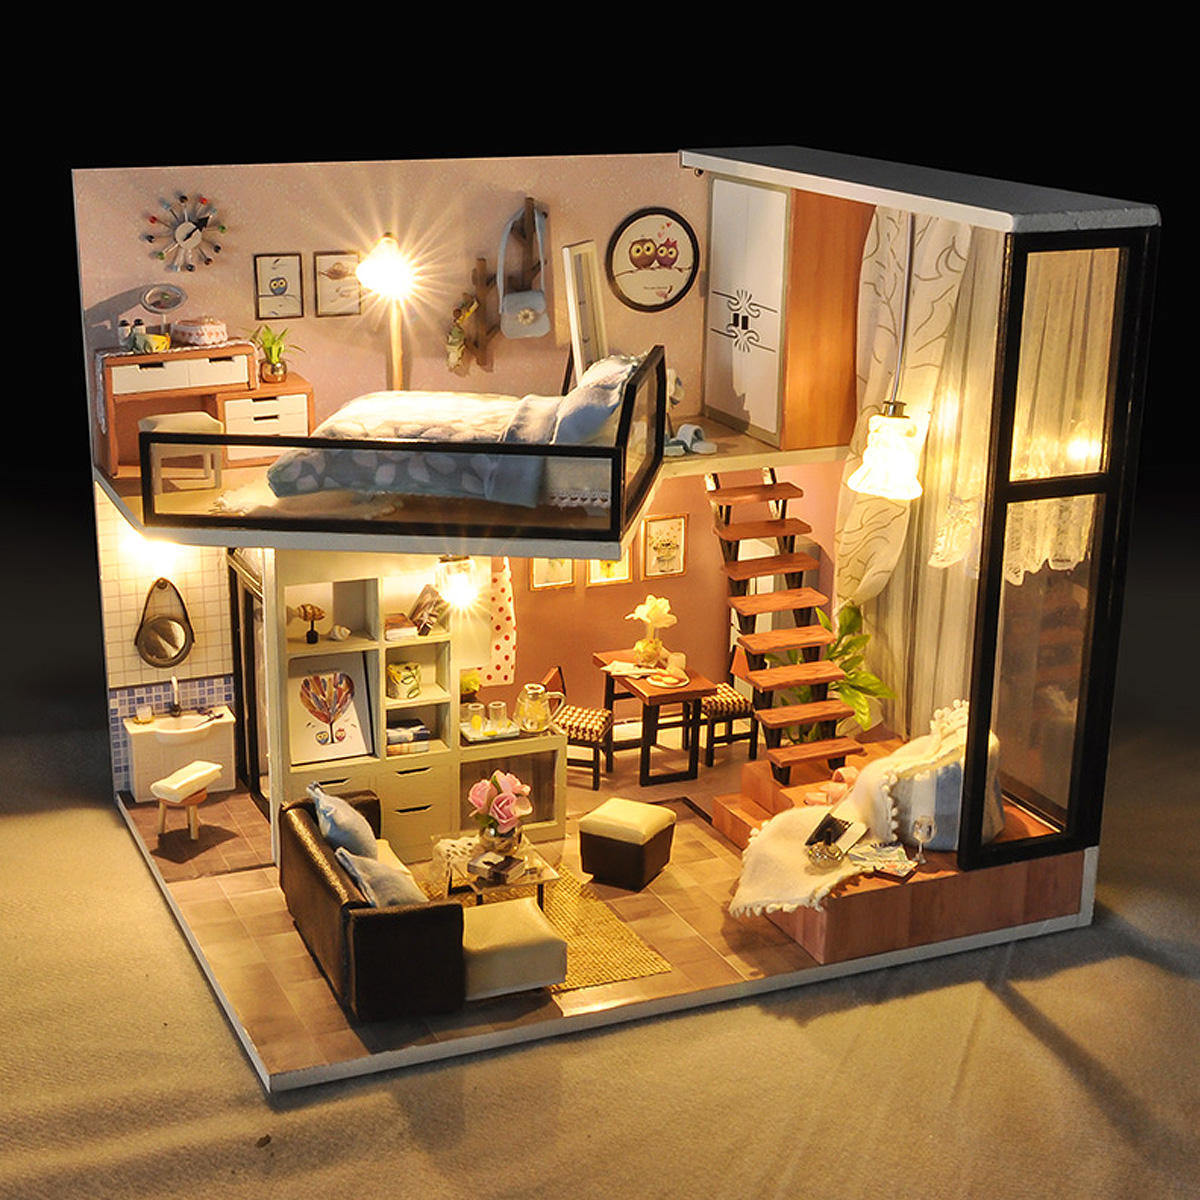 DIY Dollhouse Kit with Dust Proof Cover 1:24 Scale Wooden DIY Miniature Dollhouse Kit Toy Gift